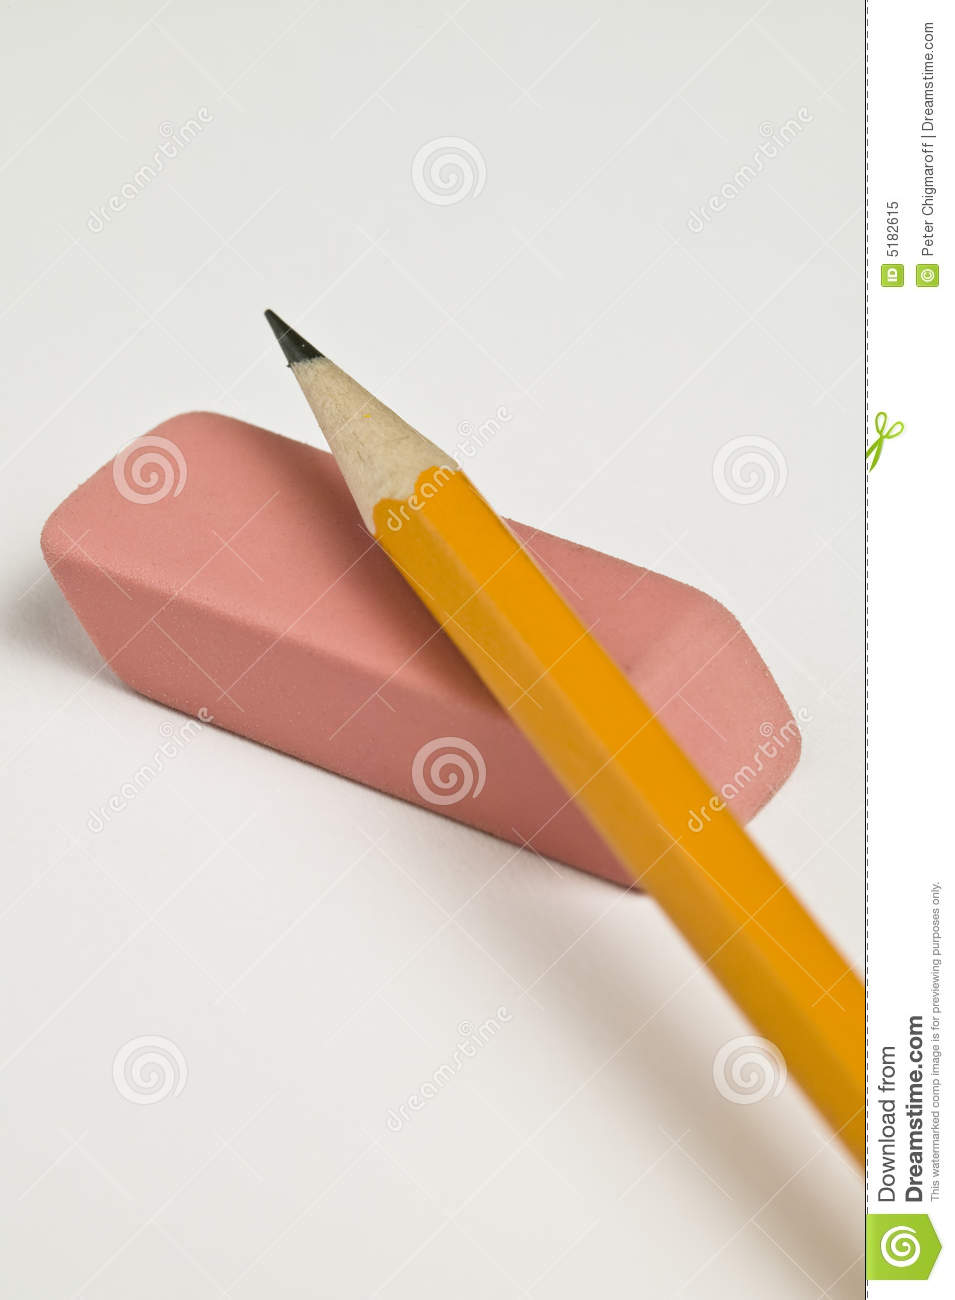 Pencil And Eraser Royalty Free Stock Photo   Image  5182615